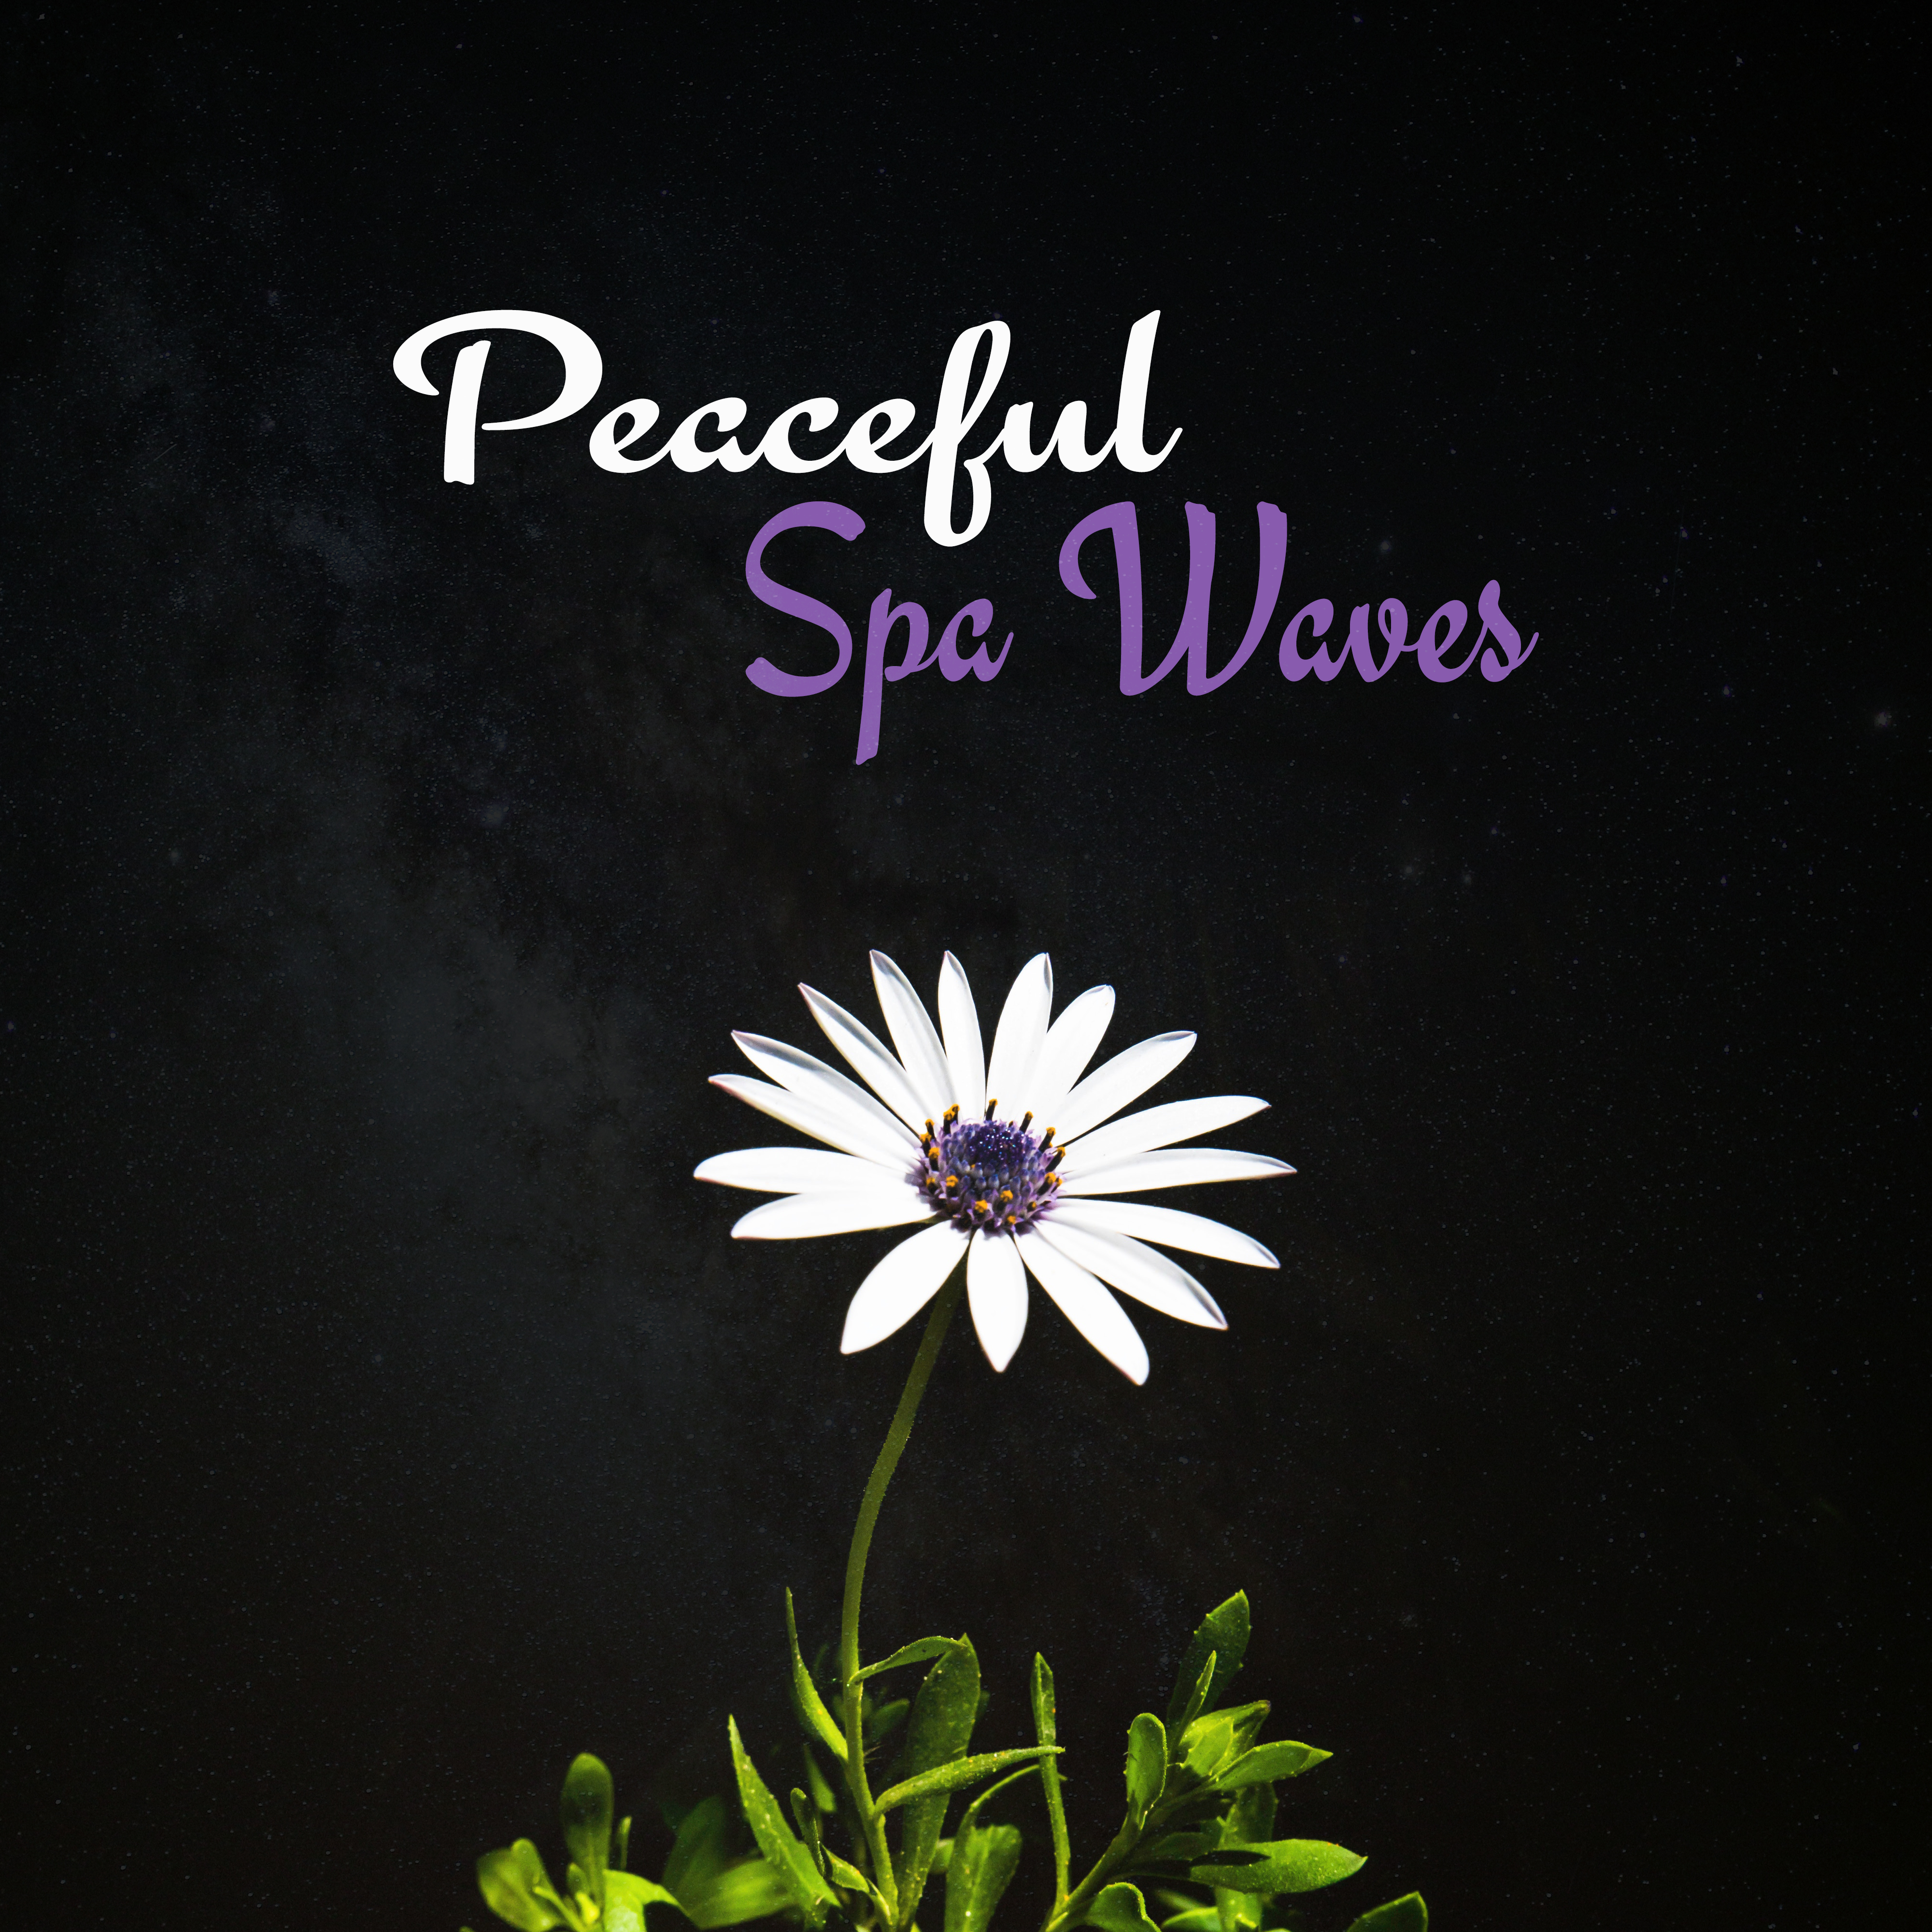 Peaceful Spa Waves  Soft Sounds to Relax, Chilled Songs, Music to Rest, Stress Relief, Spa Massage